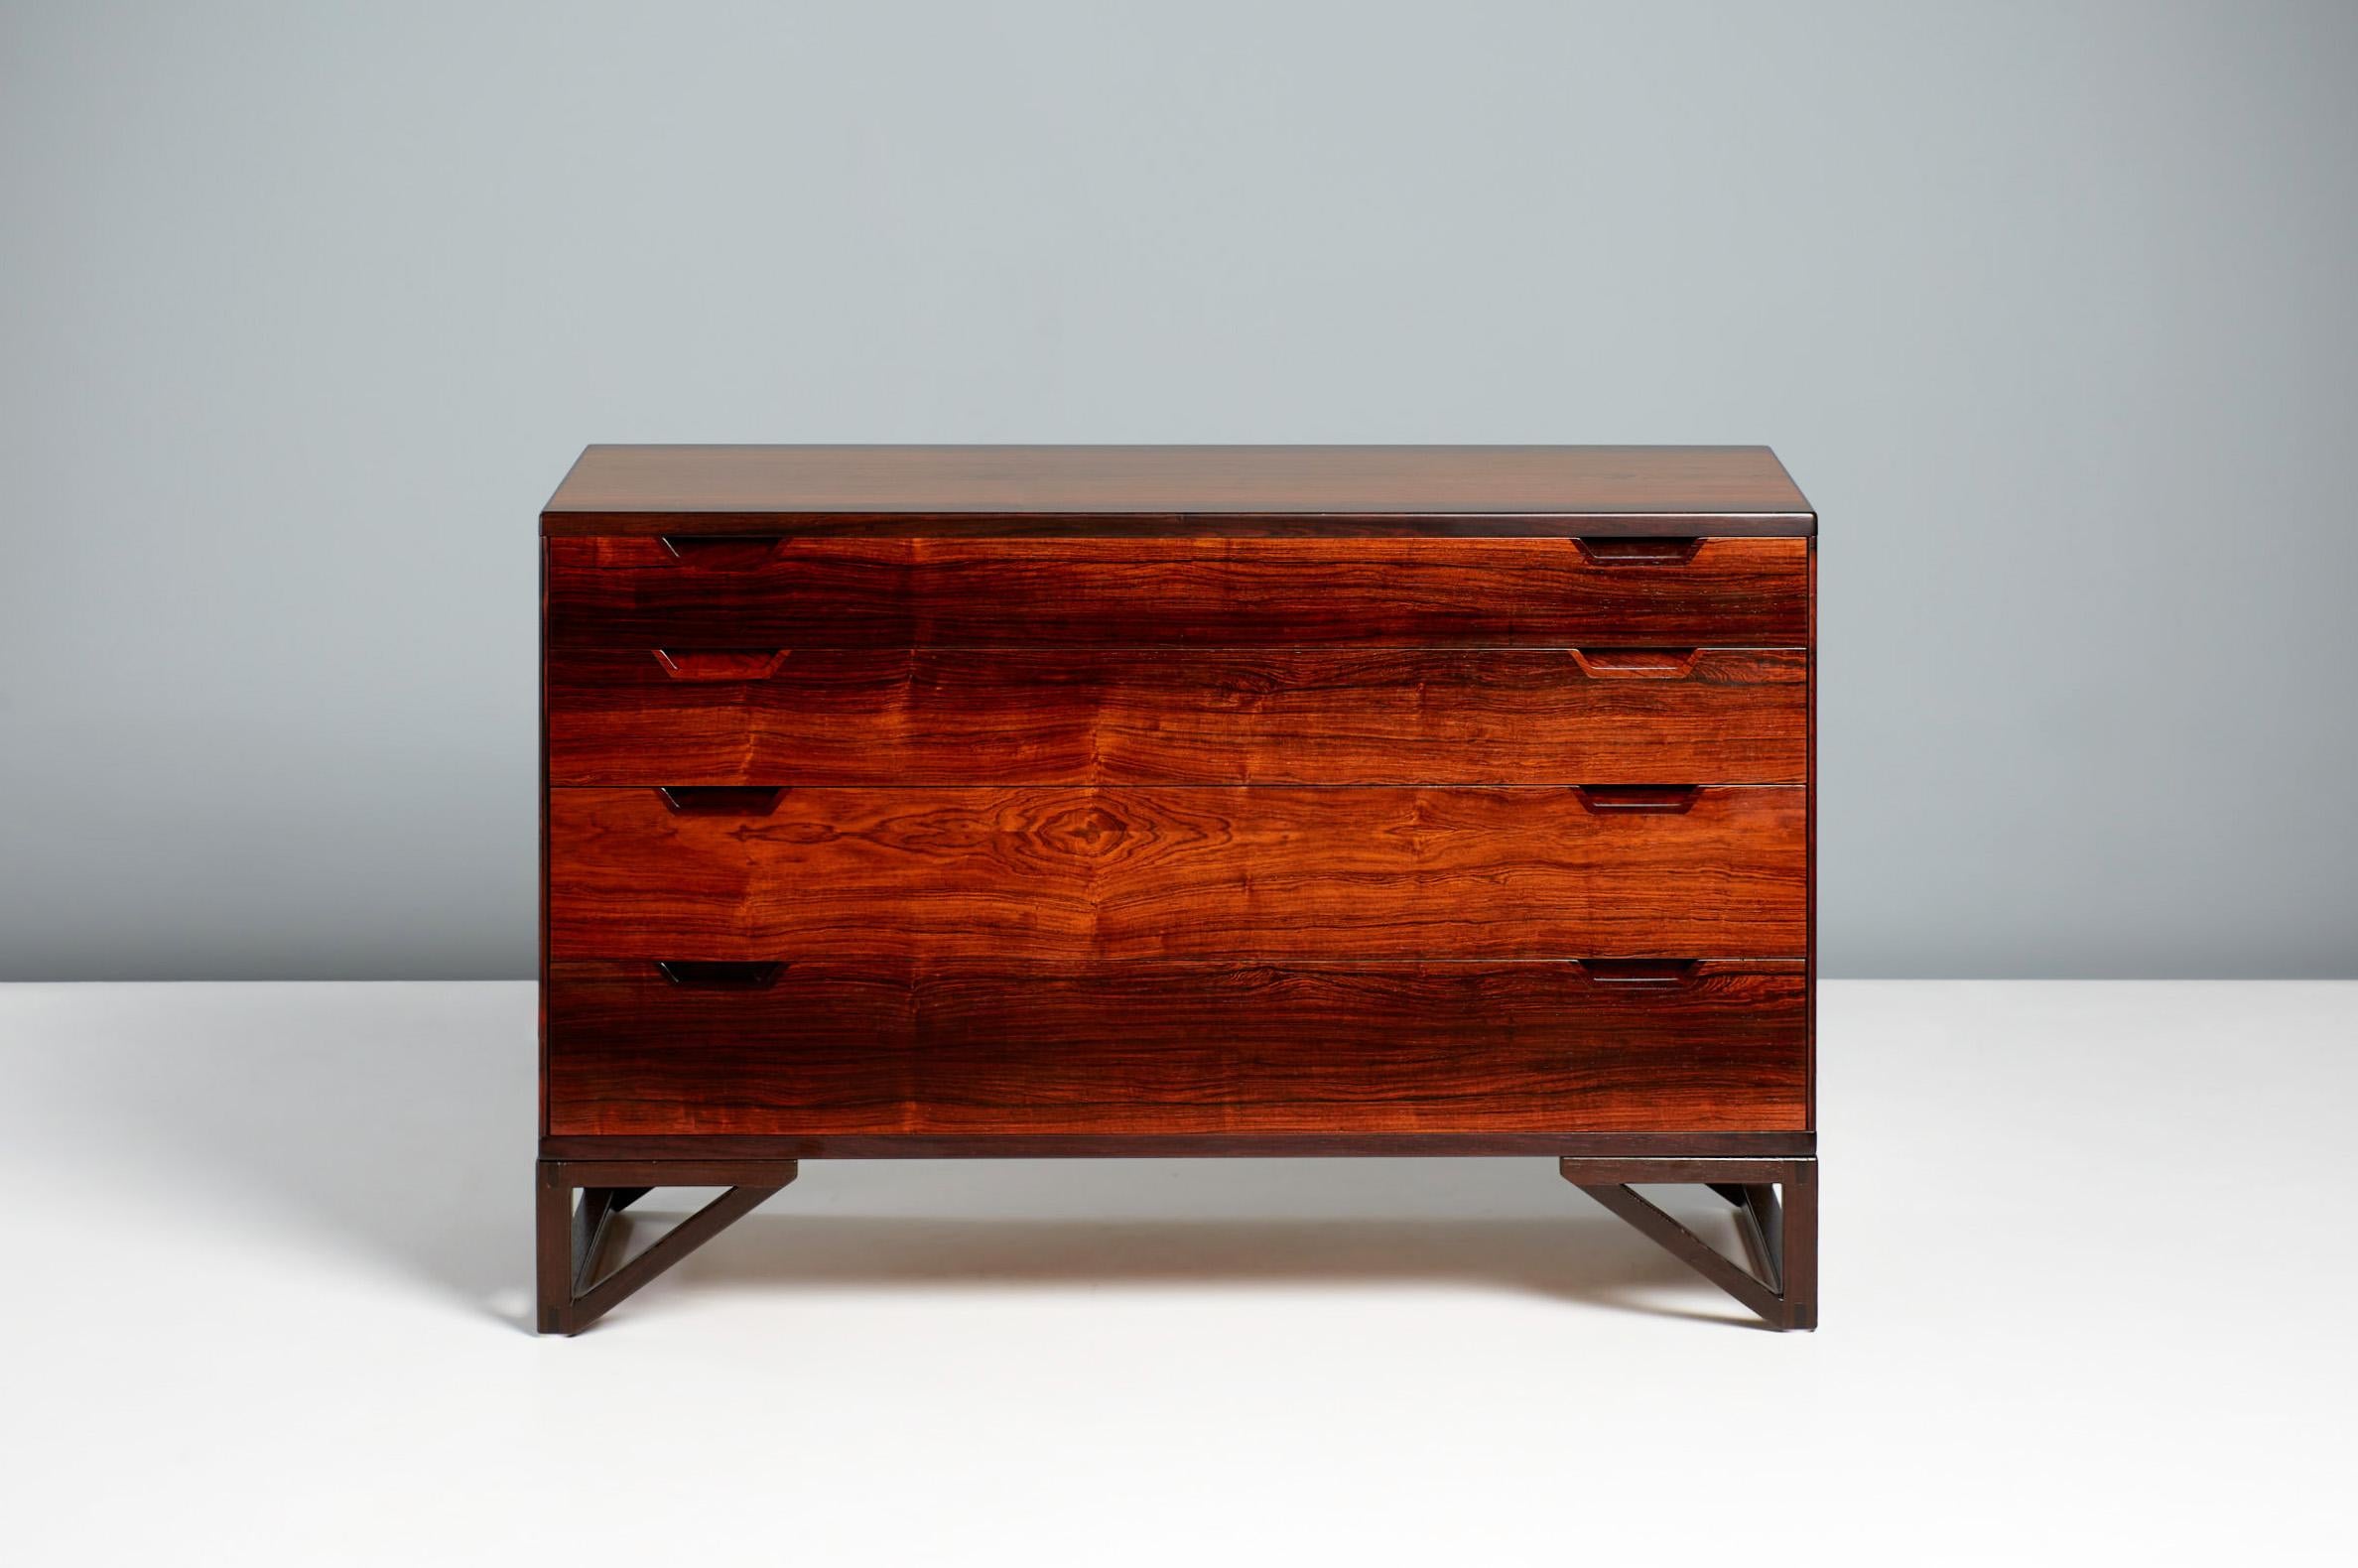 Svend Langkilde - Chest of Drawers, c1960s

An exquisite chest of drawers made from solid and veneered rosewood, designed by Sven Langkilde and produced by his own company Langkilde Mobler in Denmark. The drawer liners are made from mahogany. The